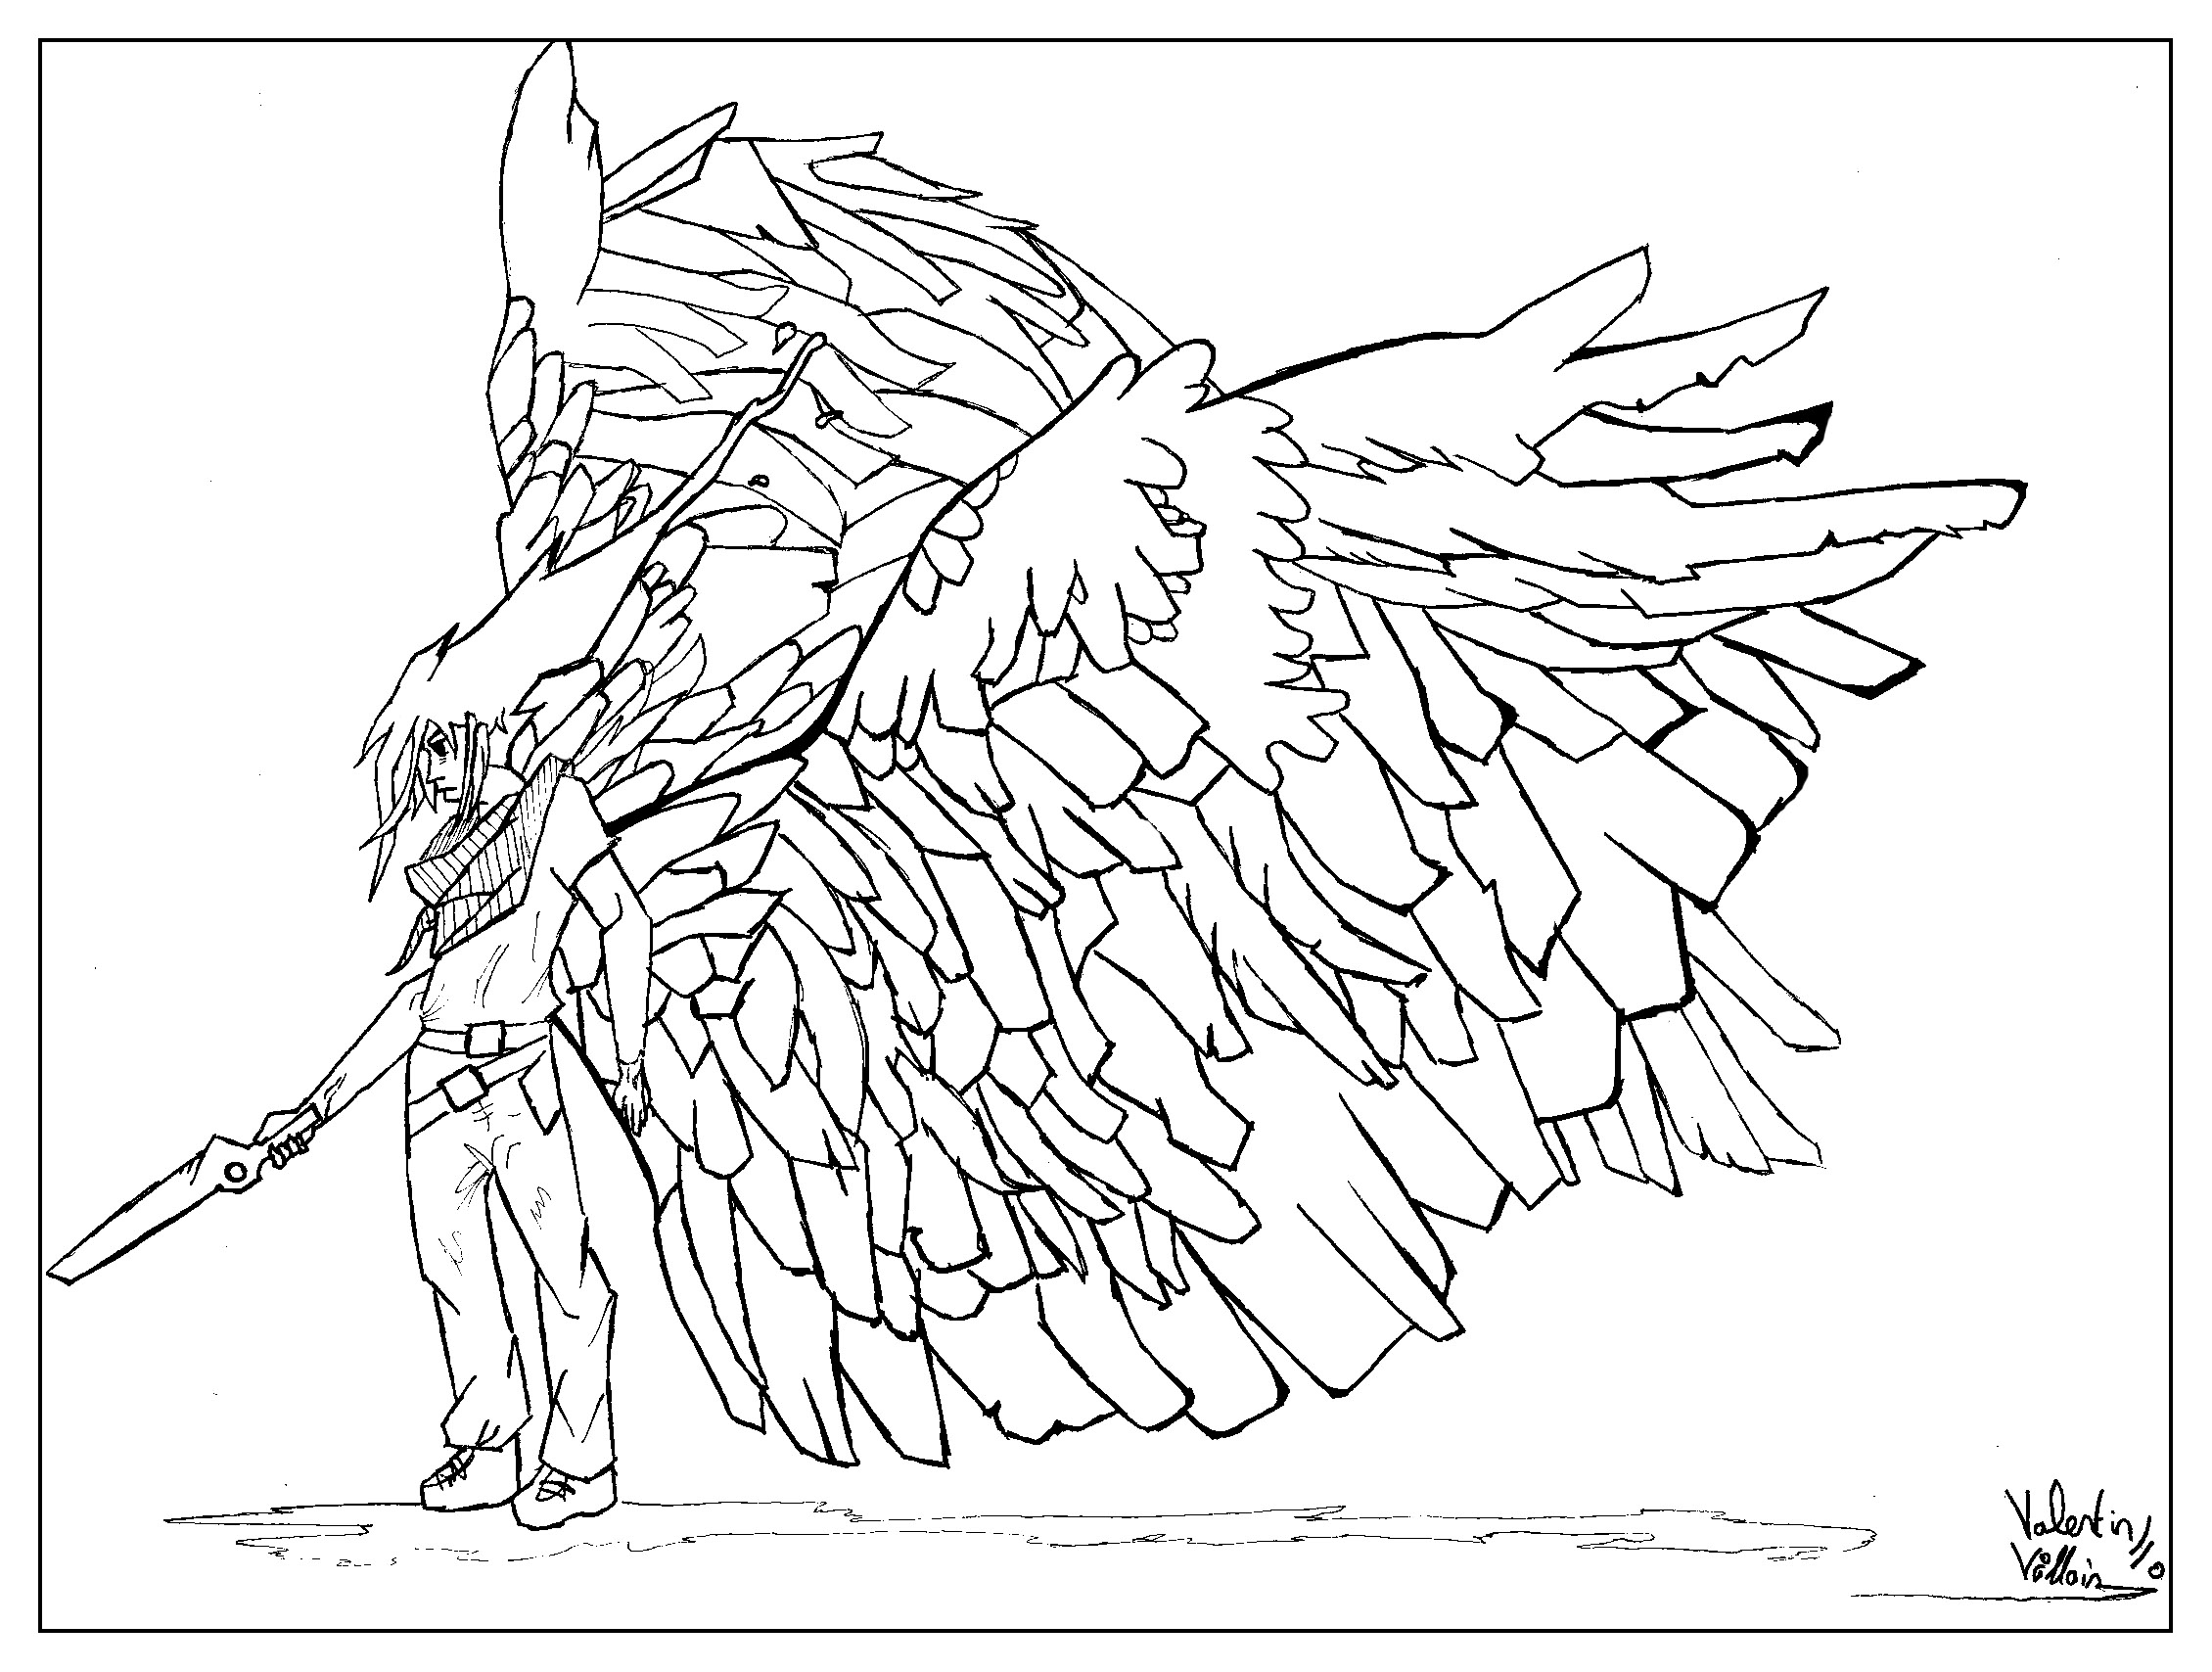 Coloring pages of a winged man, inspired by Icar, Artist : Valentin